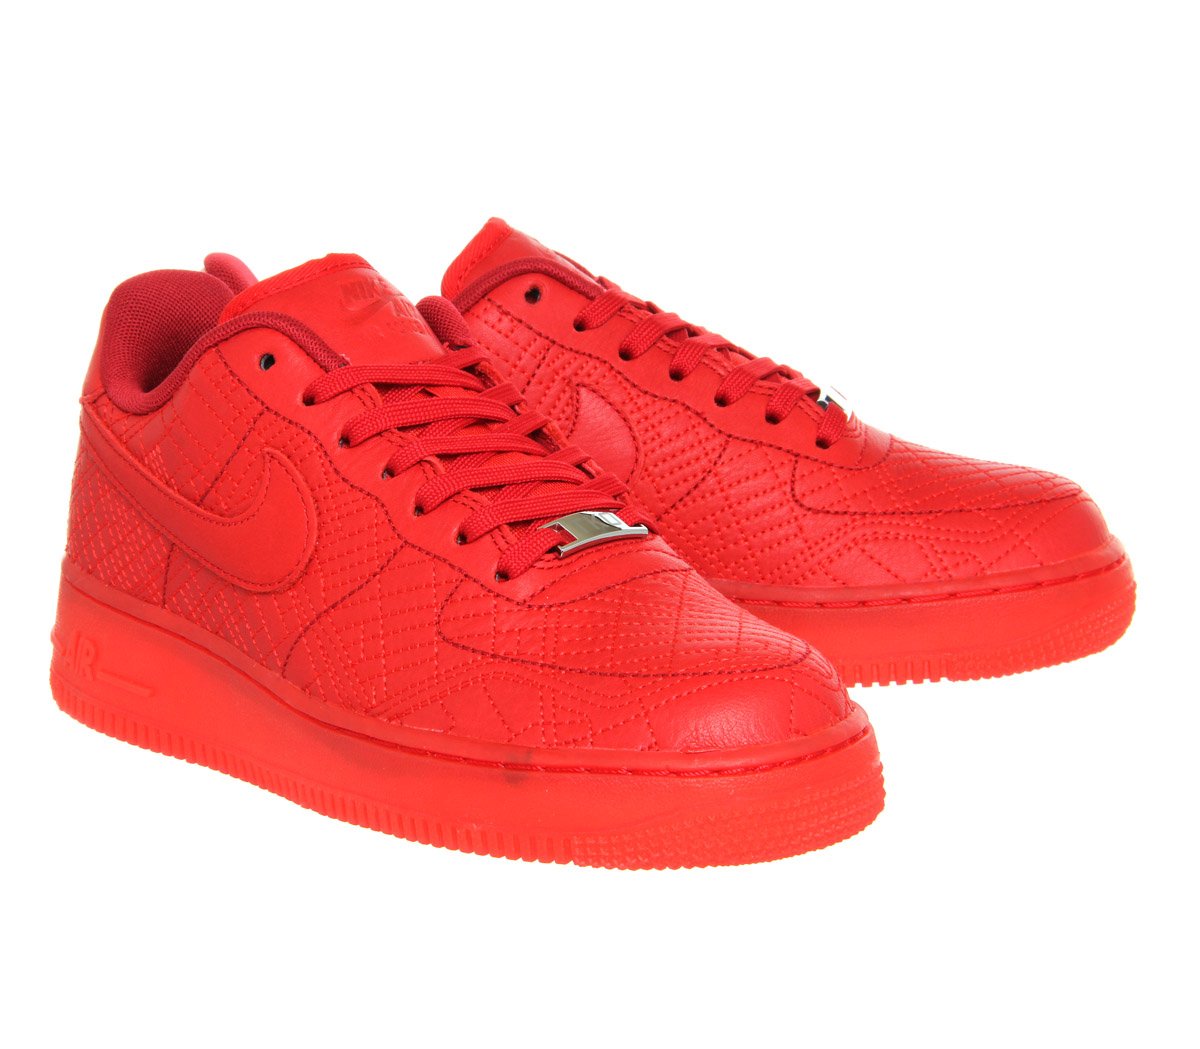 Nike Air Force 1 Tokyo Leather Sneakers in Red - Lyst